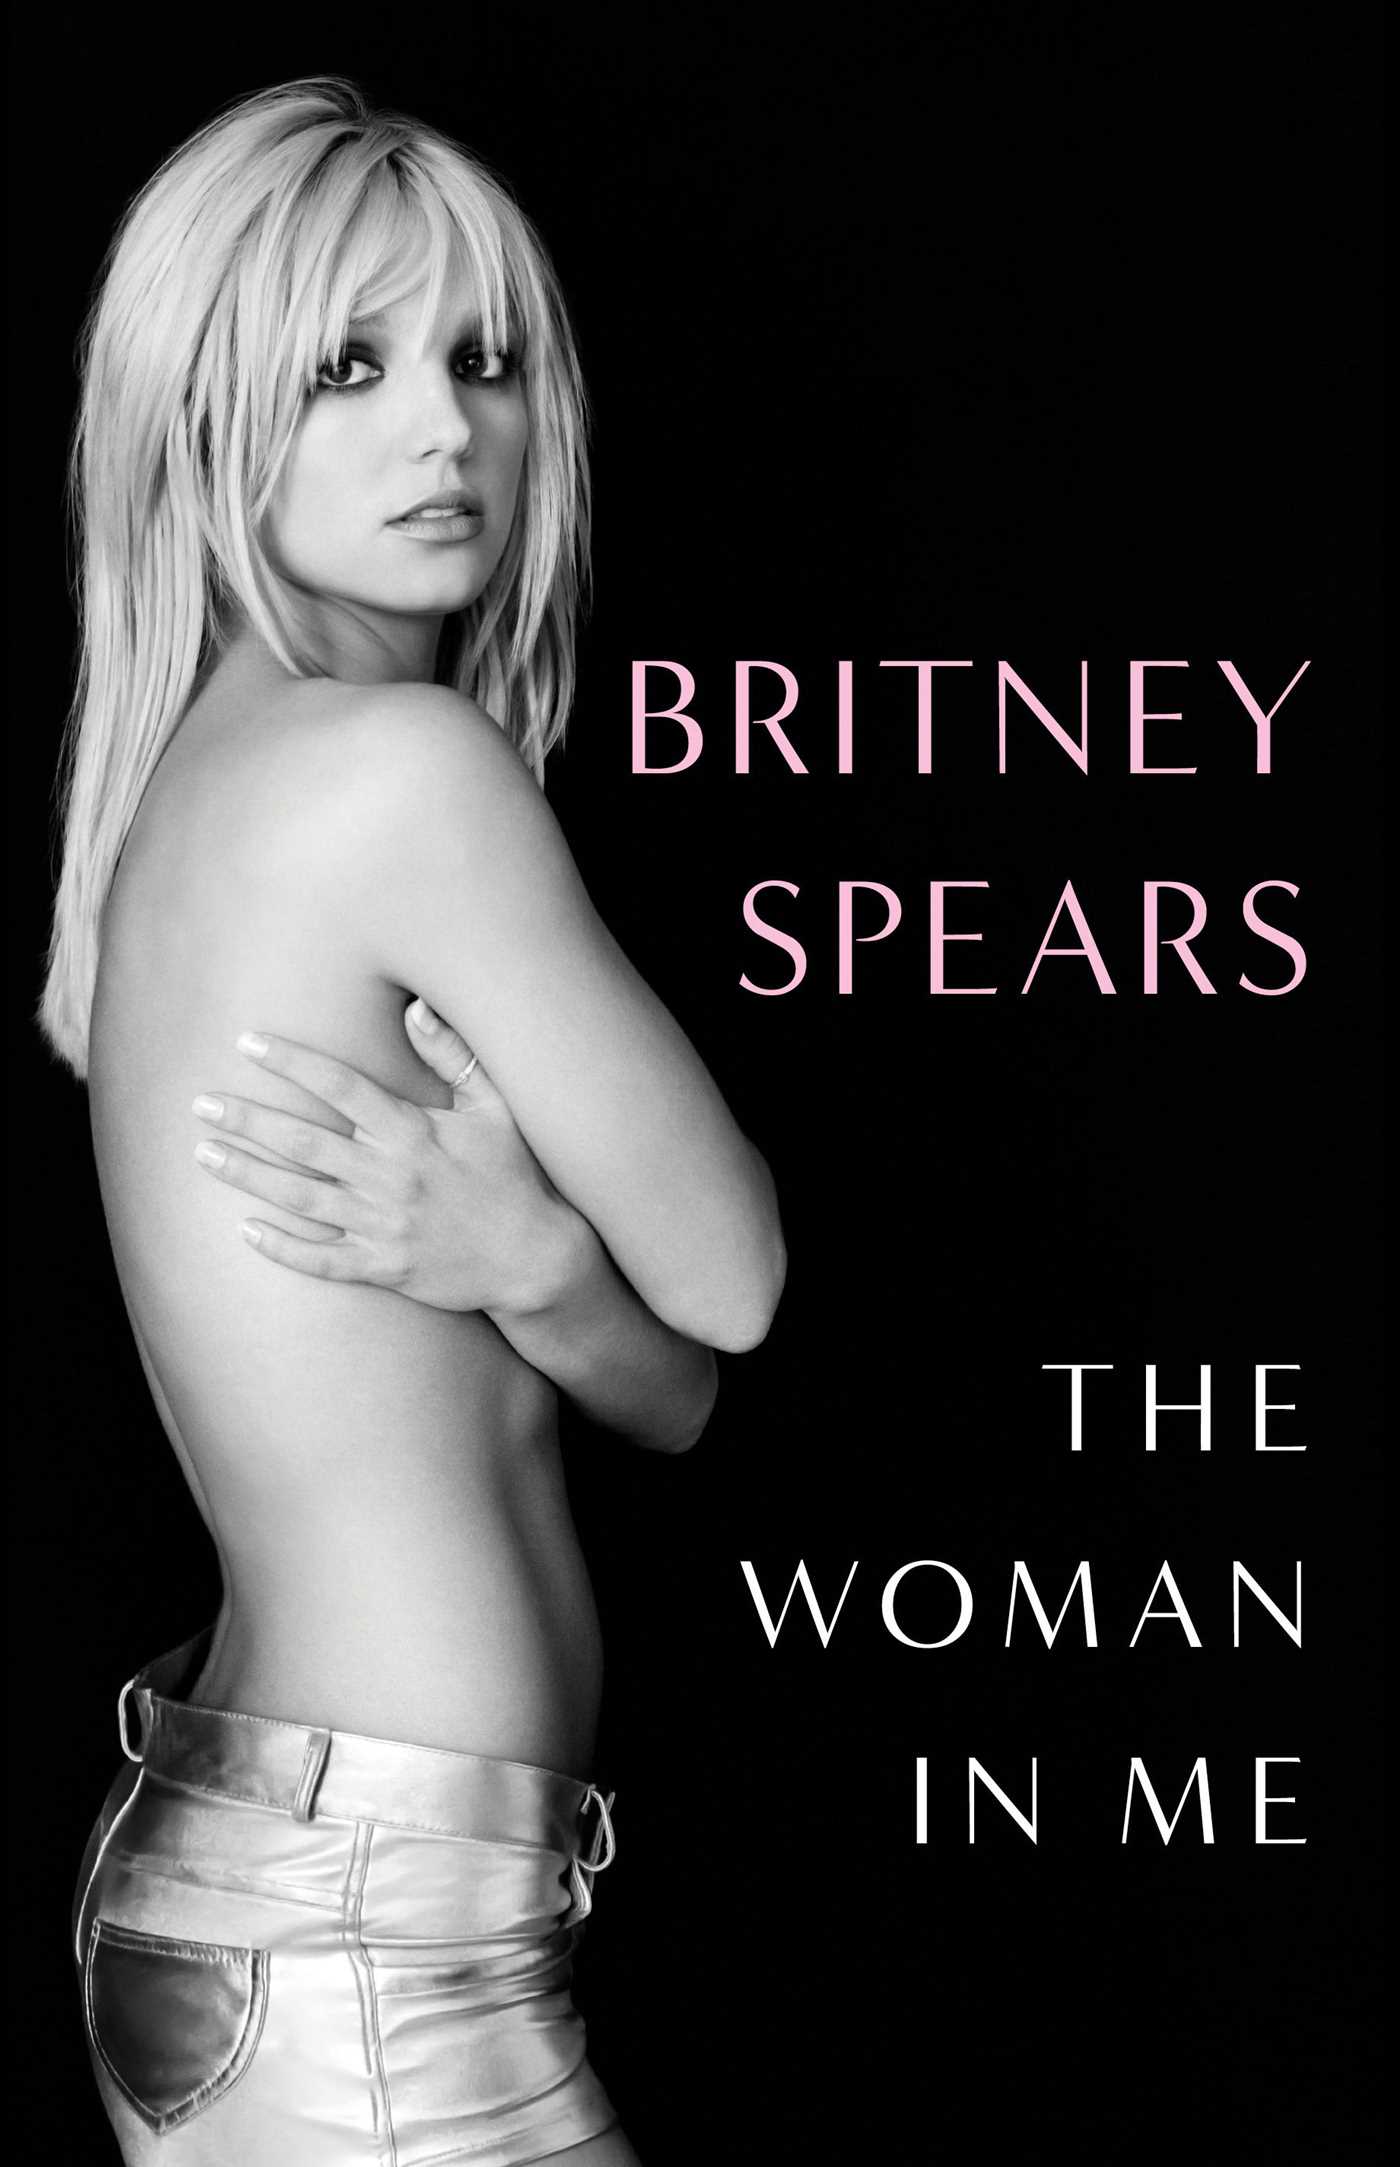 The cover of The Woman in Me, featuring a black and white photo of Britney Spears covering her apparently bare chest